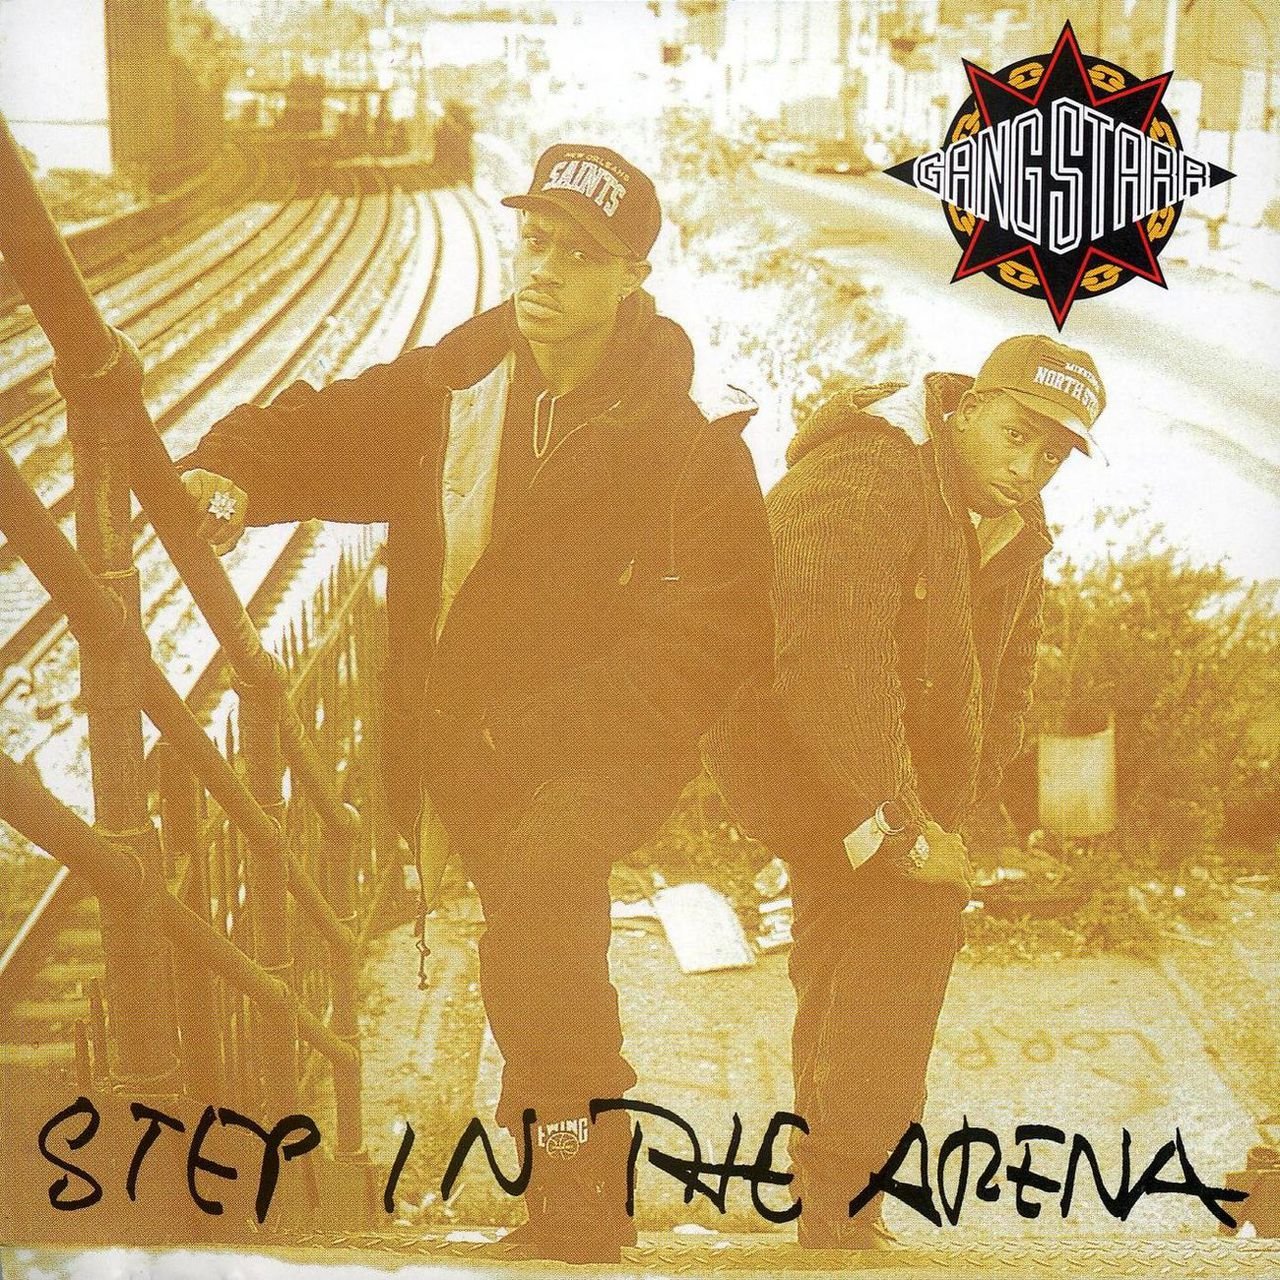 Gang Starr - Step In The Arena (Cover)